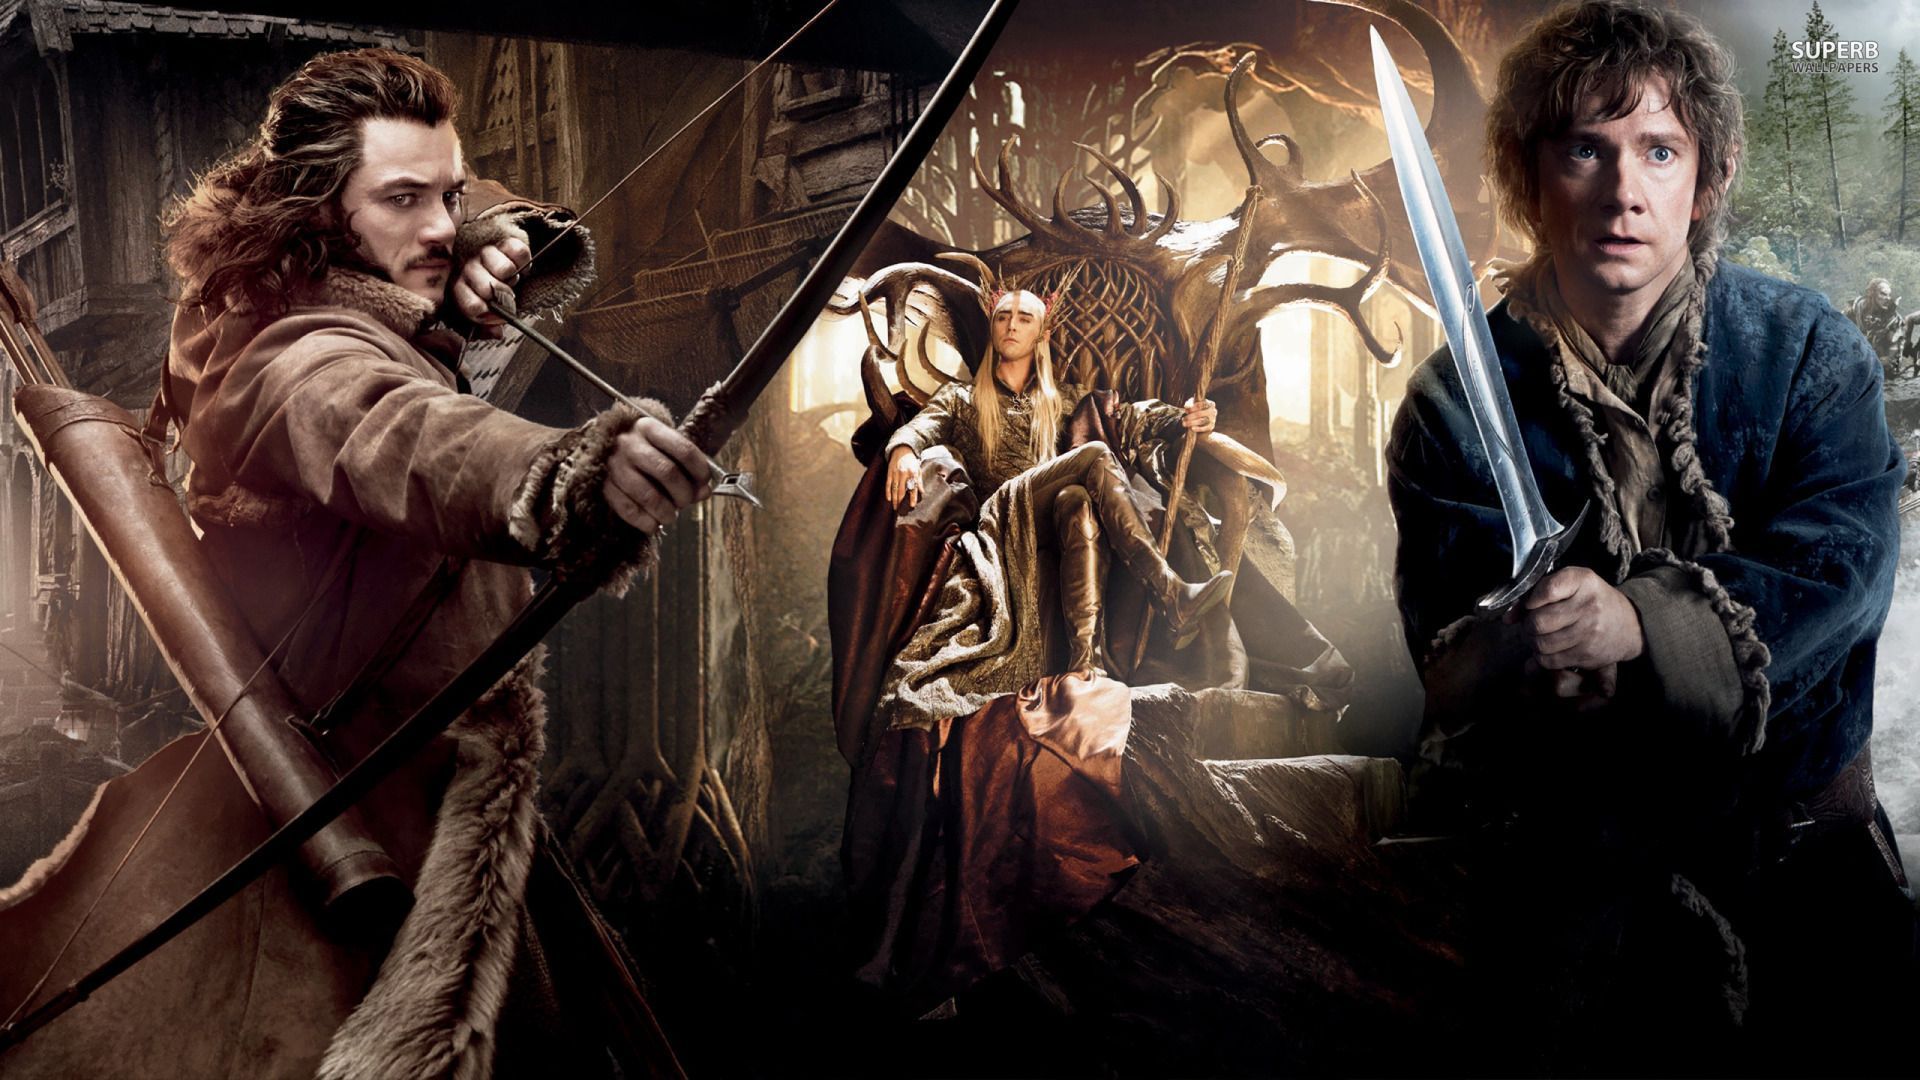 The Hobbit The Desolation of Smaug wallpaper - Movie wallpapers